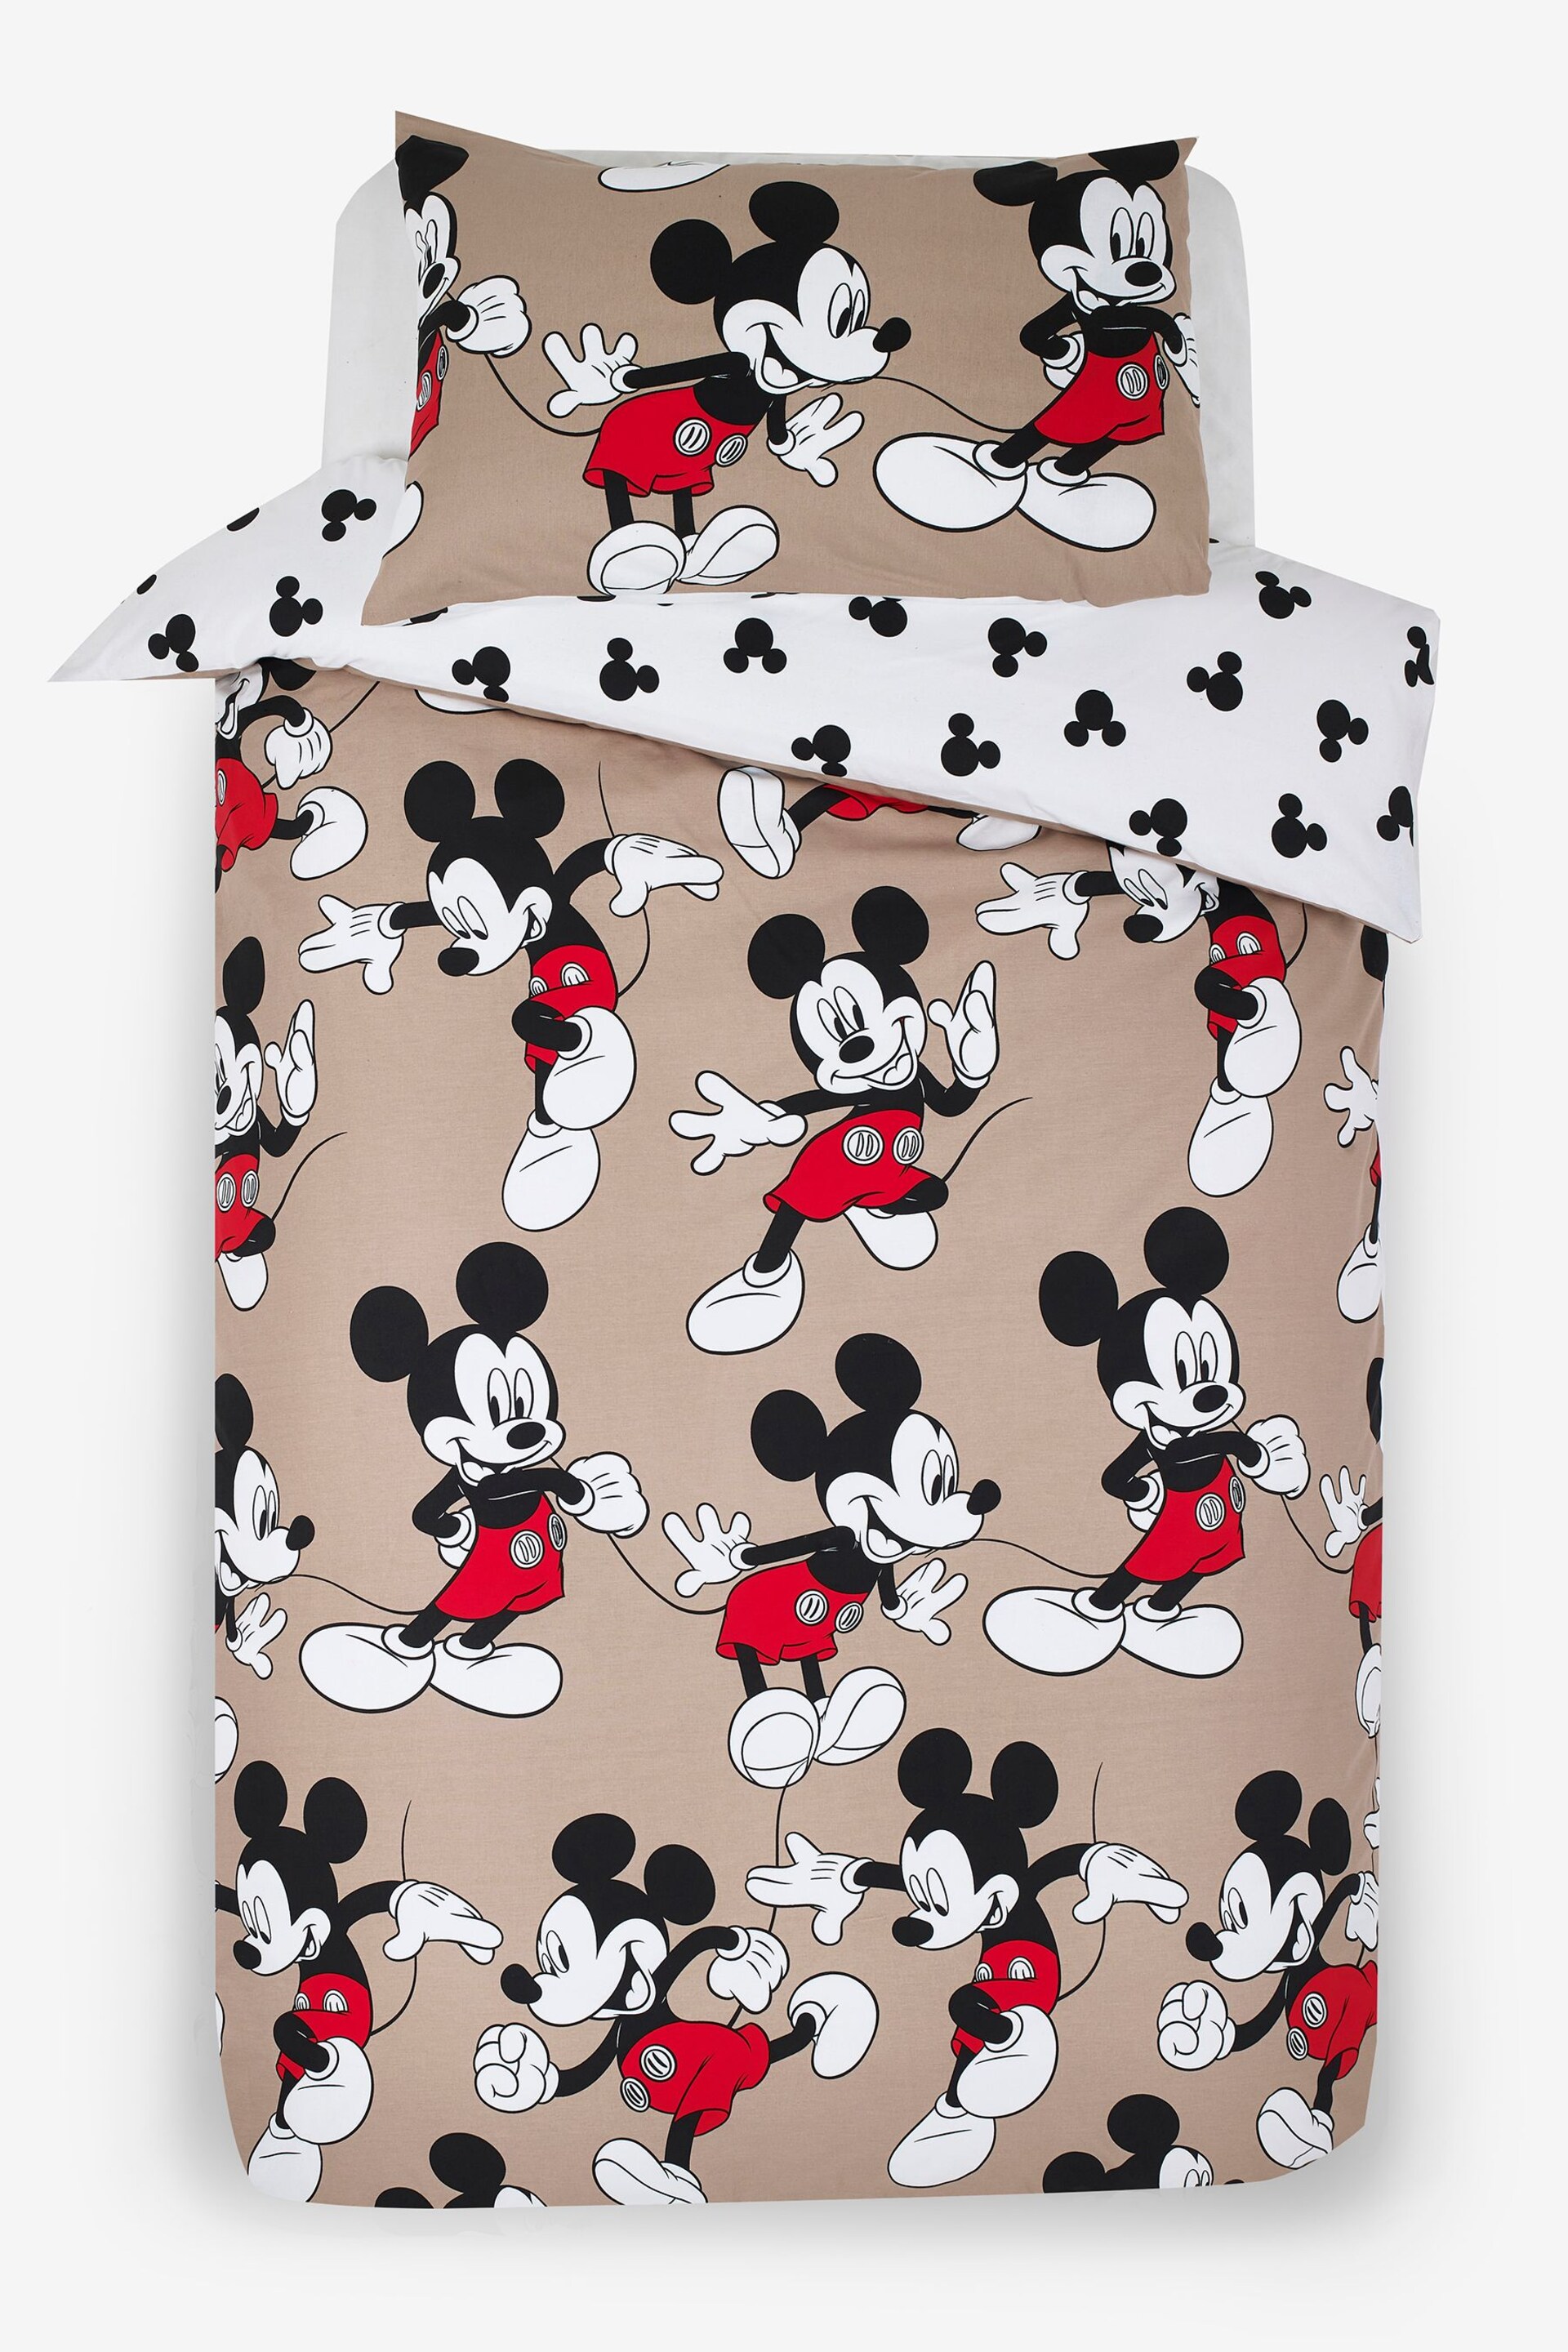 Mickey Mouse 100% Cotton Duvet Cover and Pillowcase Set - Image 6 of 7